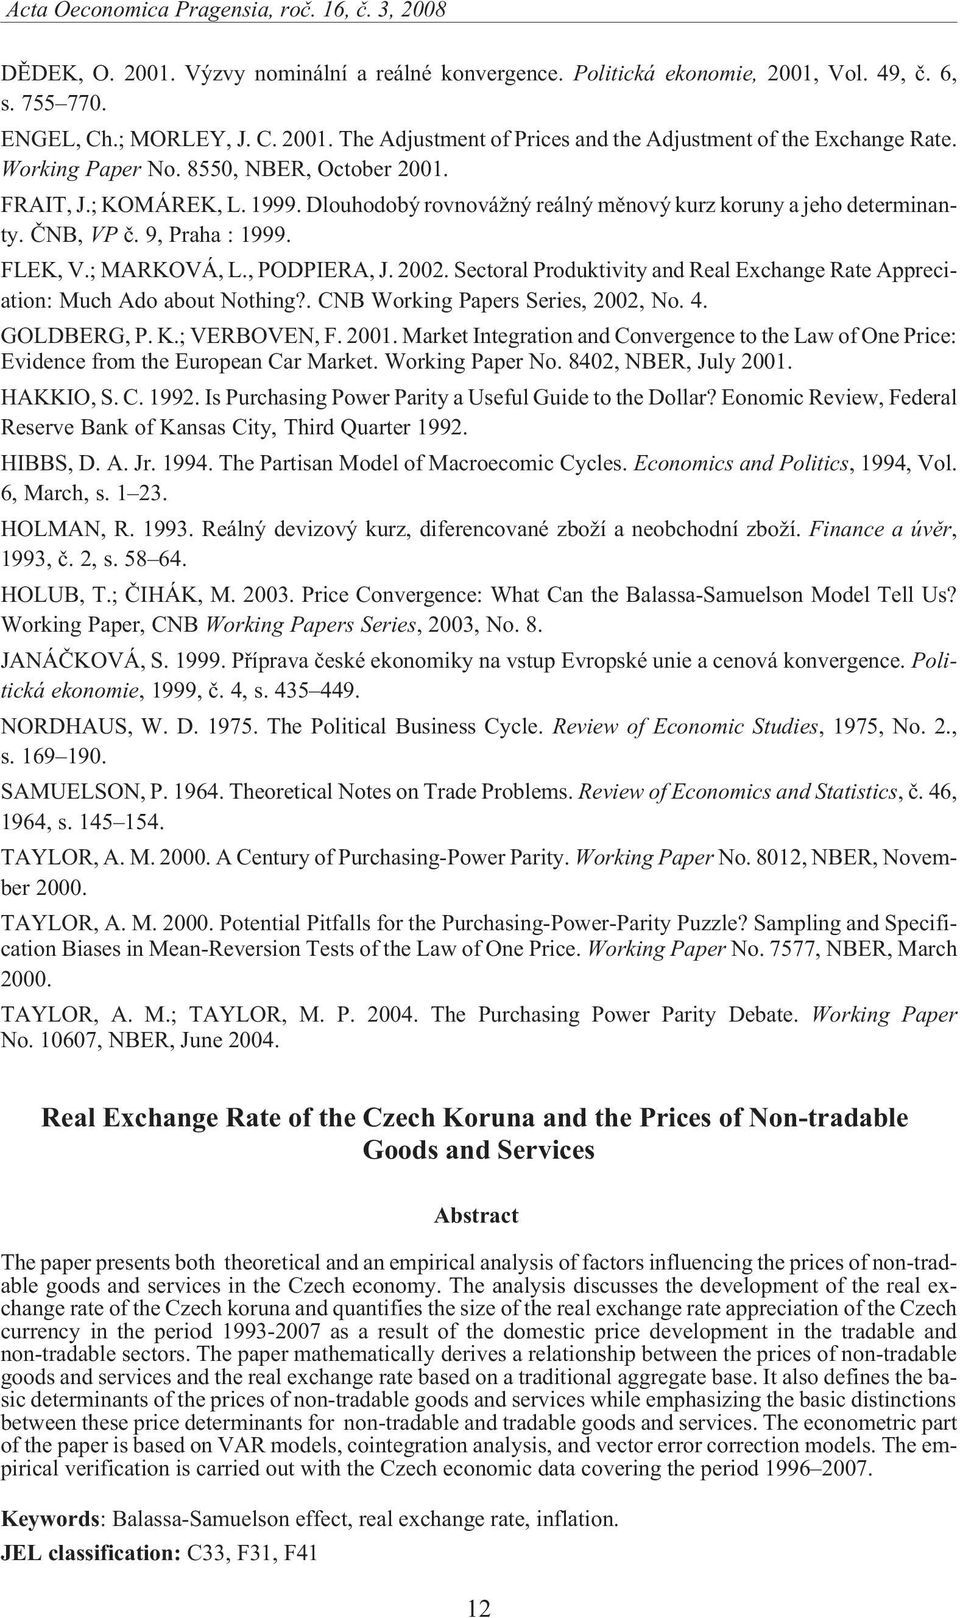 , PODPIERA, J. 2002. Sectoral Produktivity and Real Exchange Rate Appreciation: Much Ado about Nothing?. CNB Working Papers Series, 2002, No. 4. GOLDBERG, P. K.; VERBOVEN, F. 2001.